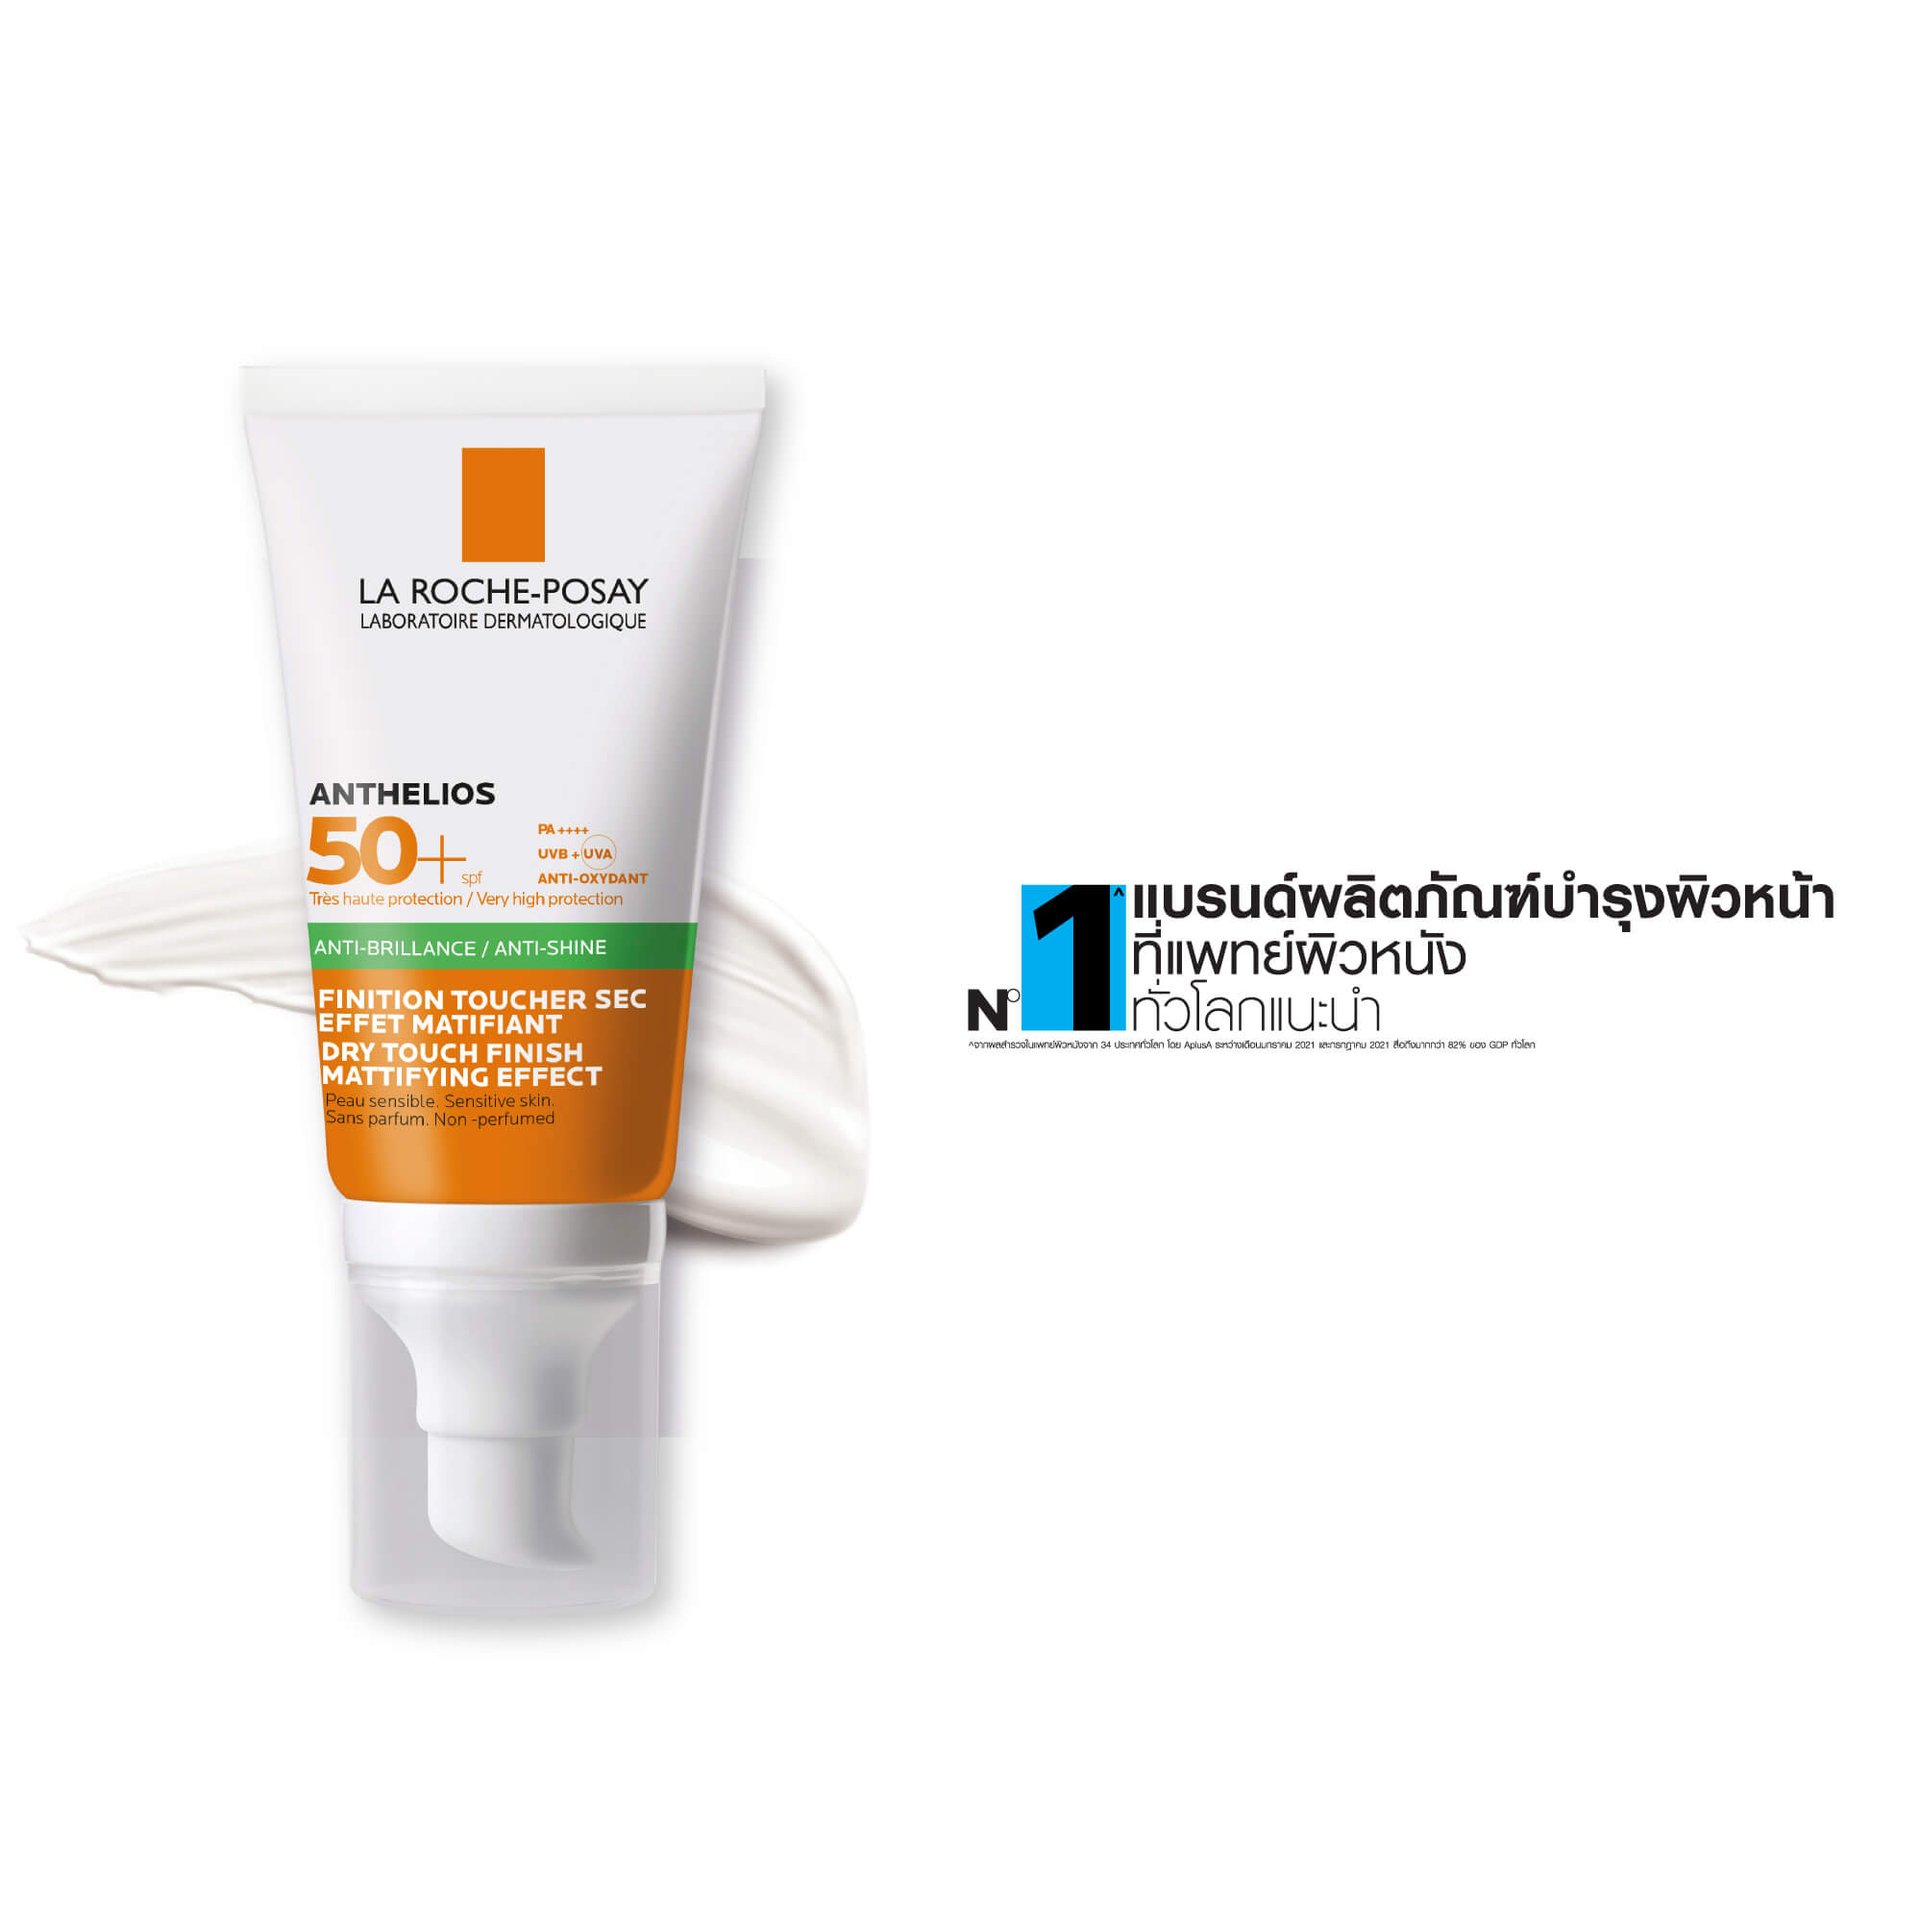 ANTHELIOS XL DRY TOUCH GEL-CREAM SPF50+ NON-PERFUMED